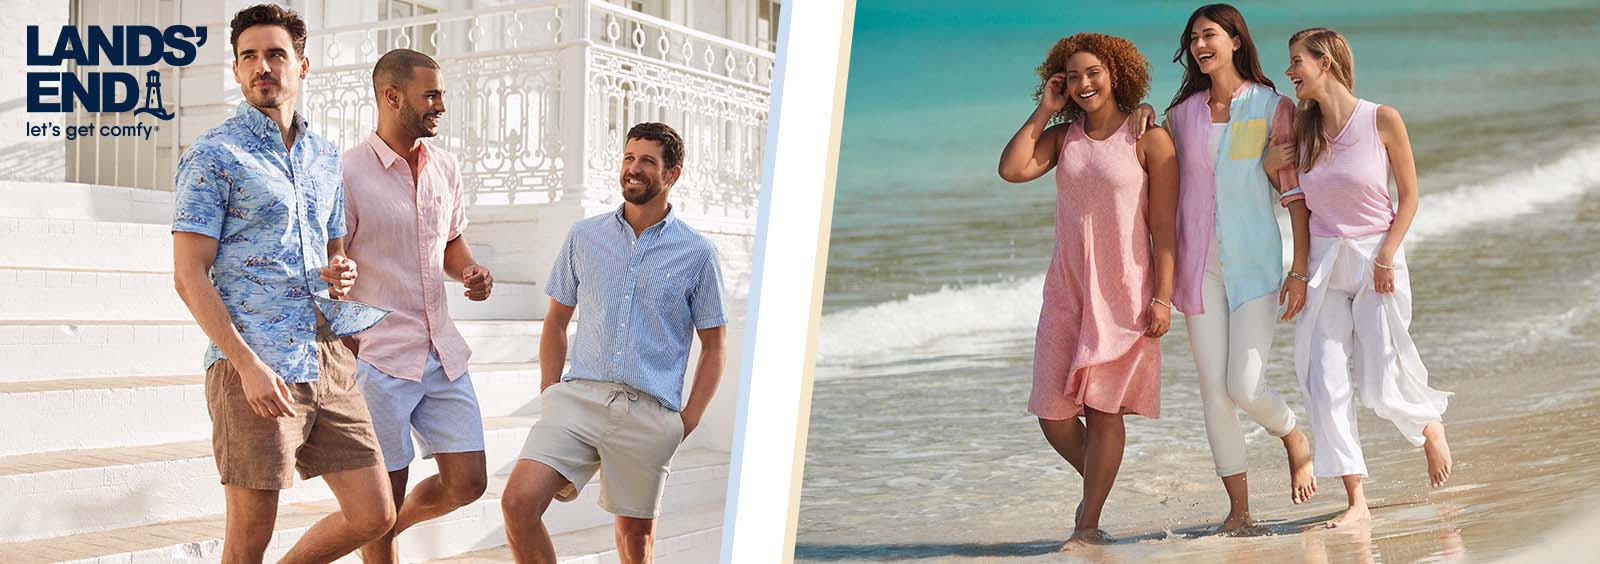 Outfits for Your Bachelor/Bachelorette Party | Lands’ End